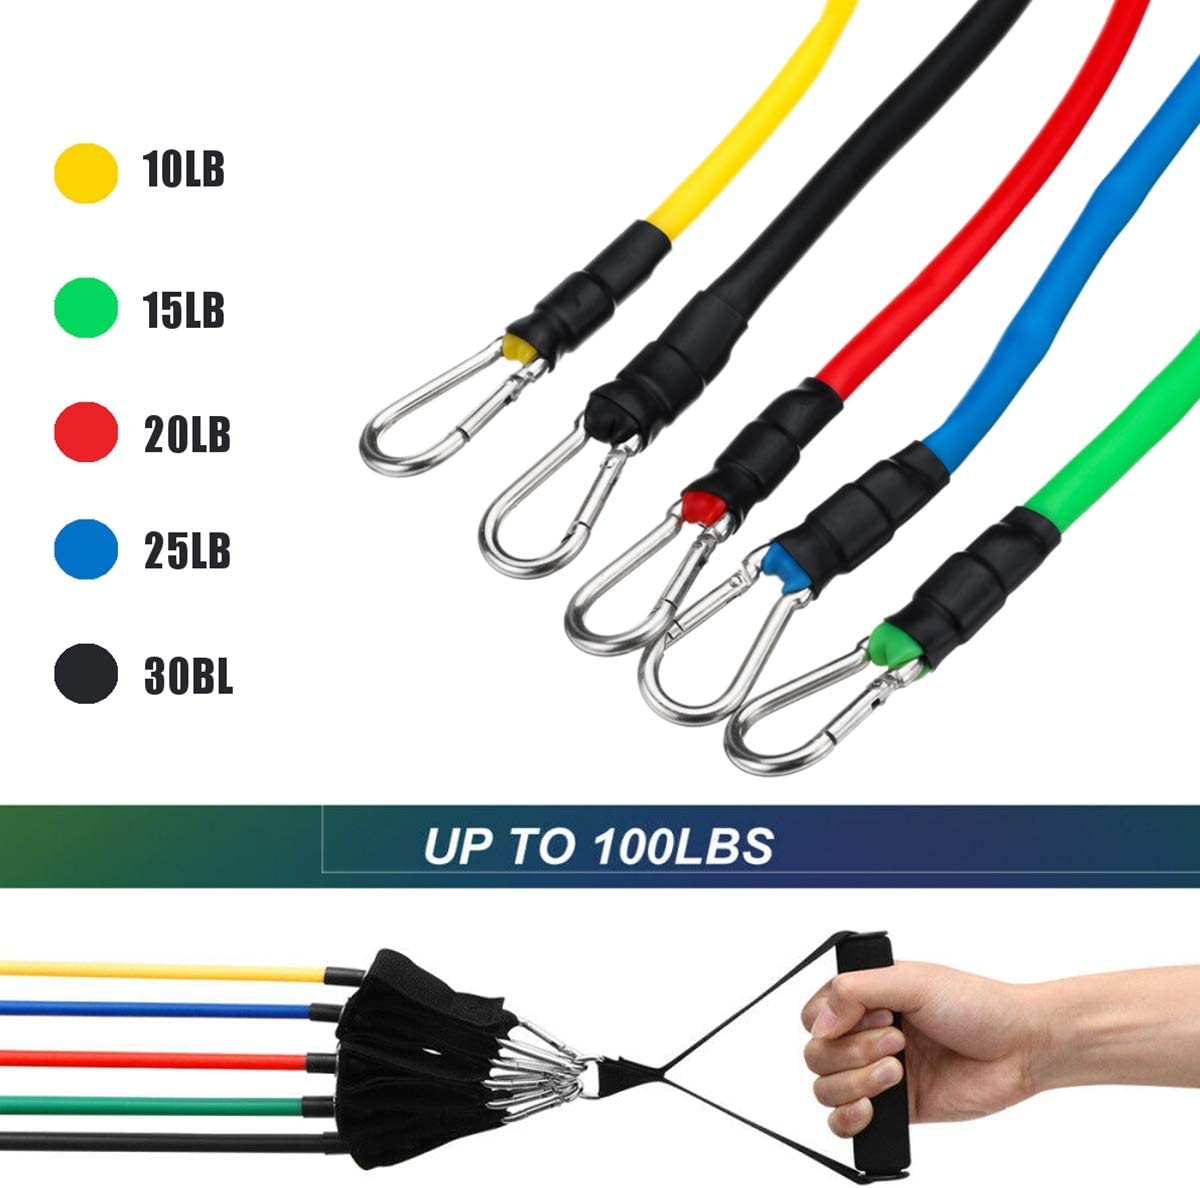 11pcs resistance bands set Gym Workout Exercise Tube Latex Tube Theraband Elastic 11pcs Resistance Fitness Bands For Body Shaping